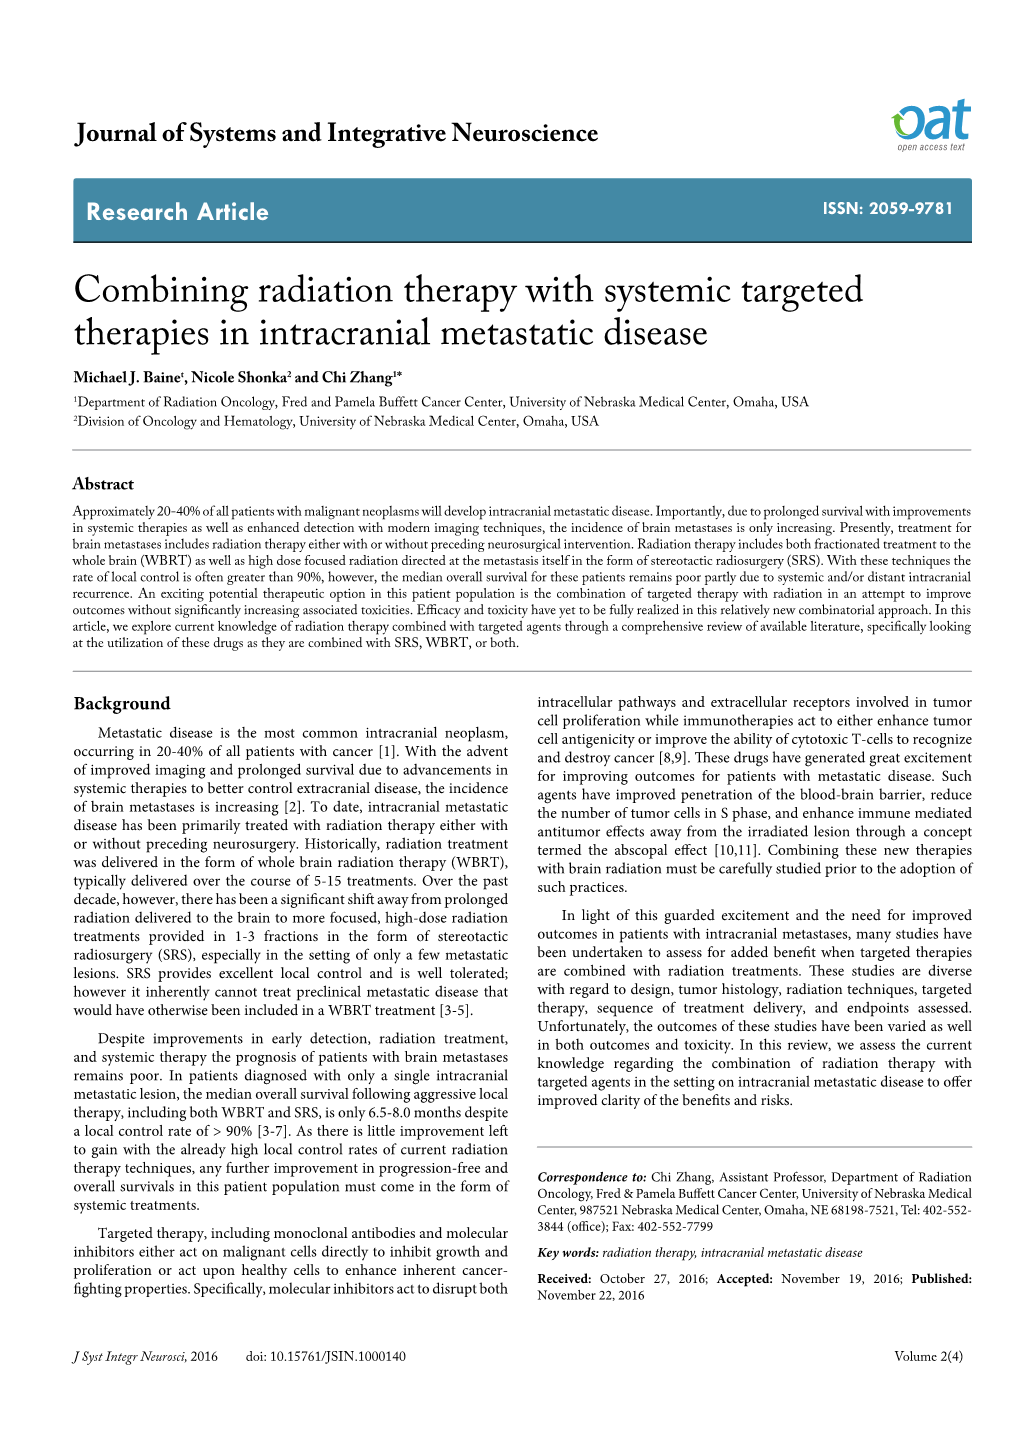 Combining Radiation Therapy with Systemic Targeted Therapies in Intracranial Metastatic Disease Michael J